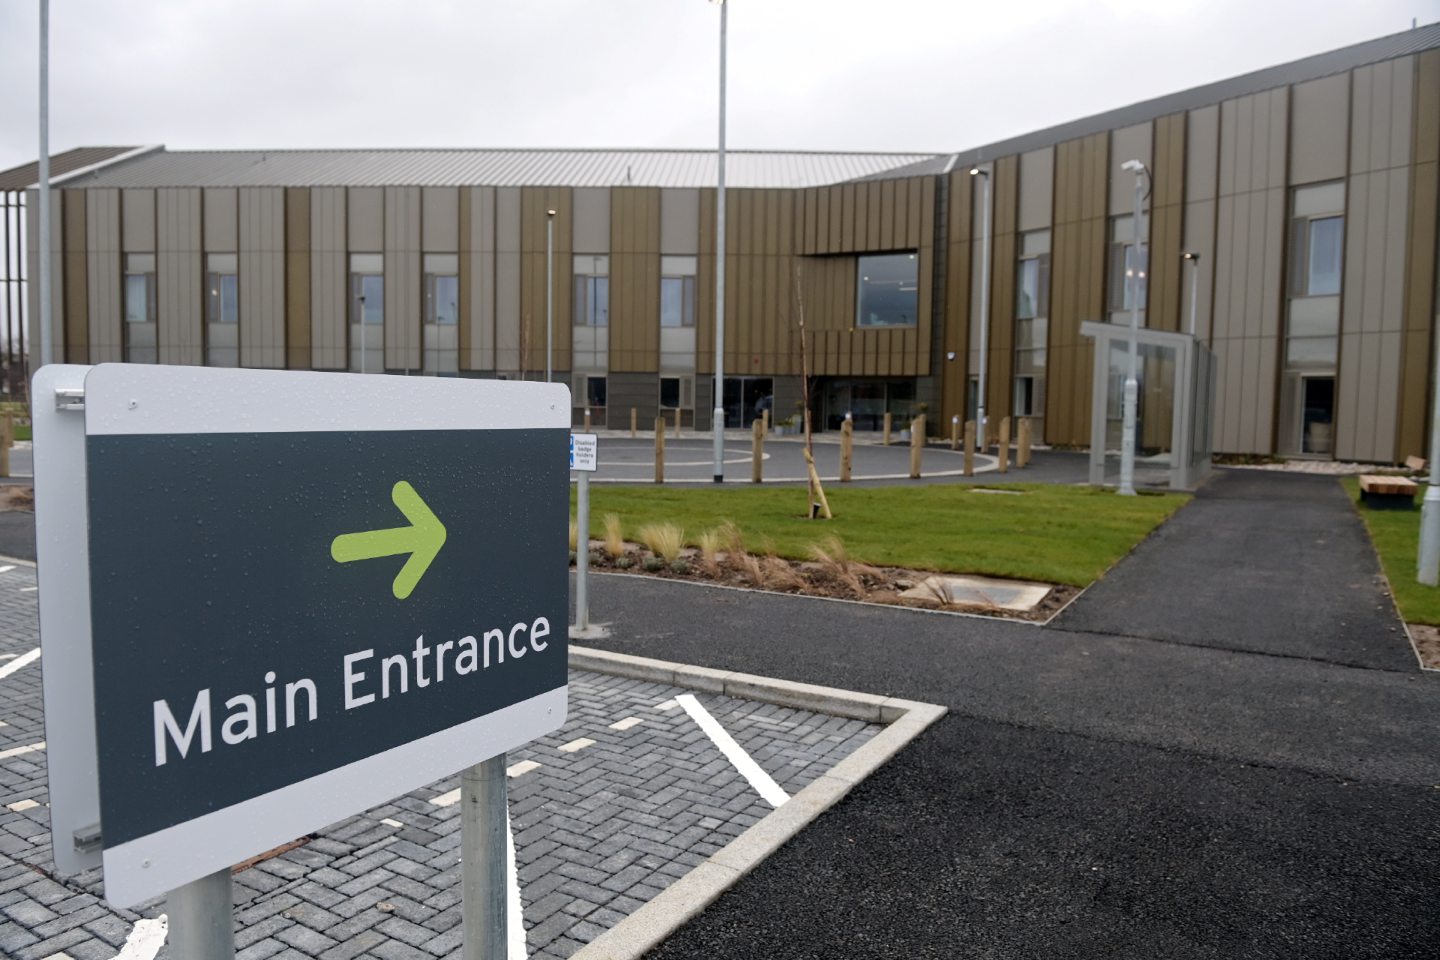 Exterior view of National Treatment Centre in Inverness with sign pointing to main entrance. 